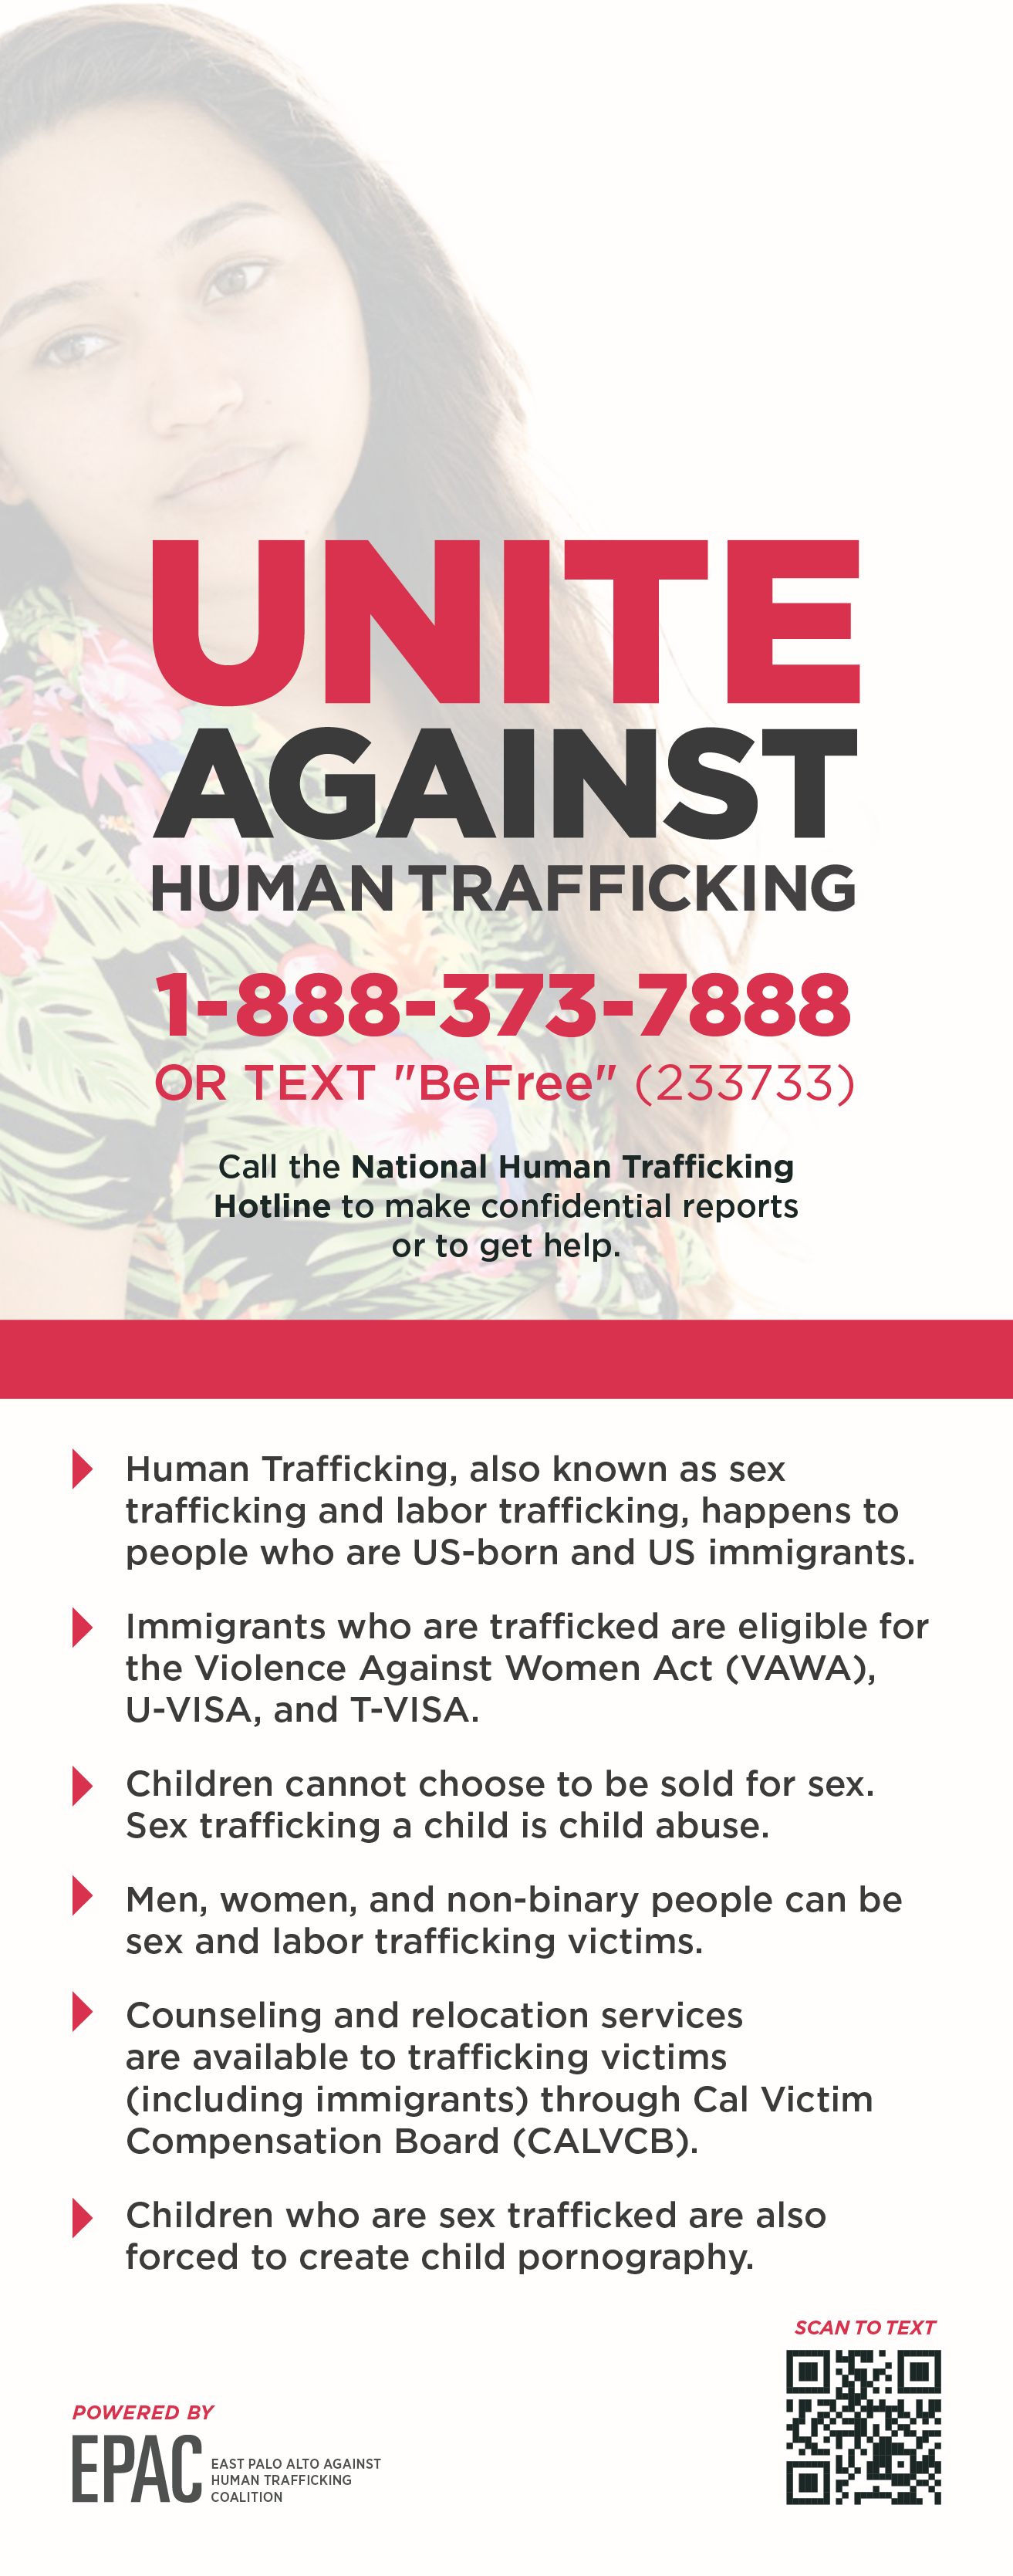 Human Trafficking Resources City of East Palo Alto